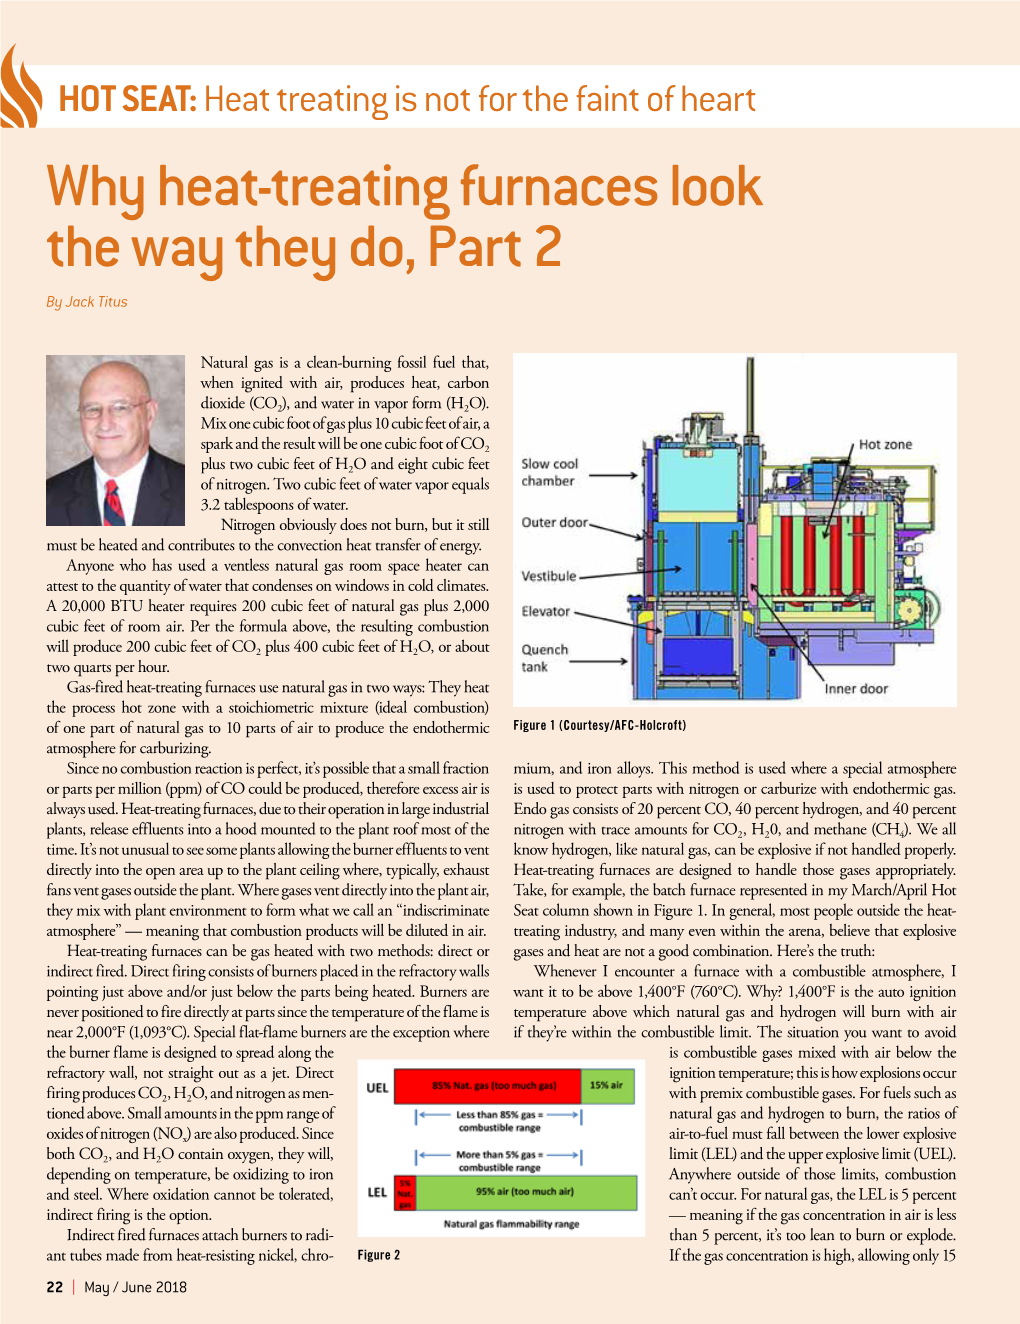 Why Heat-Treating Furnaces Look the Way They Do, Part 2 by Jack Titus